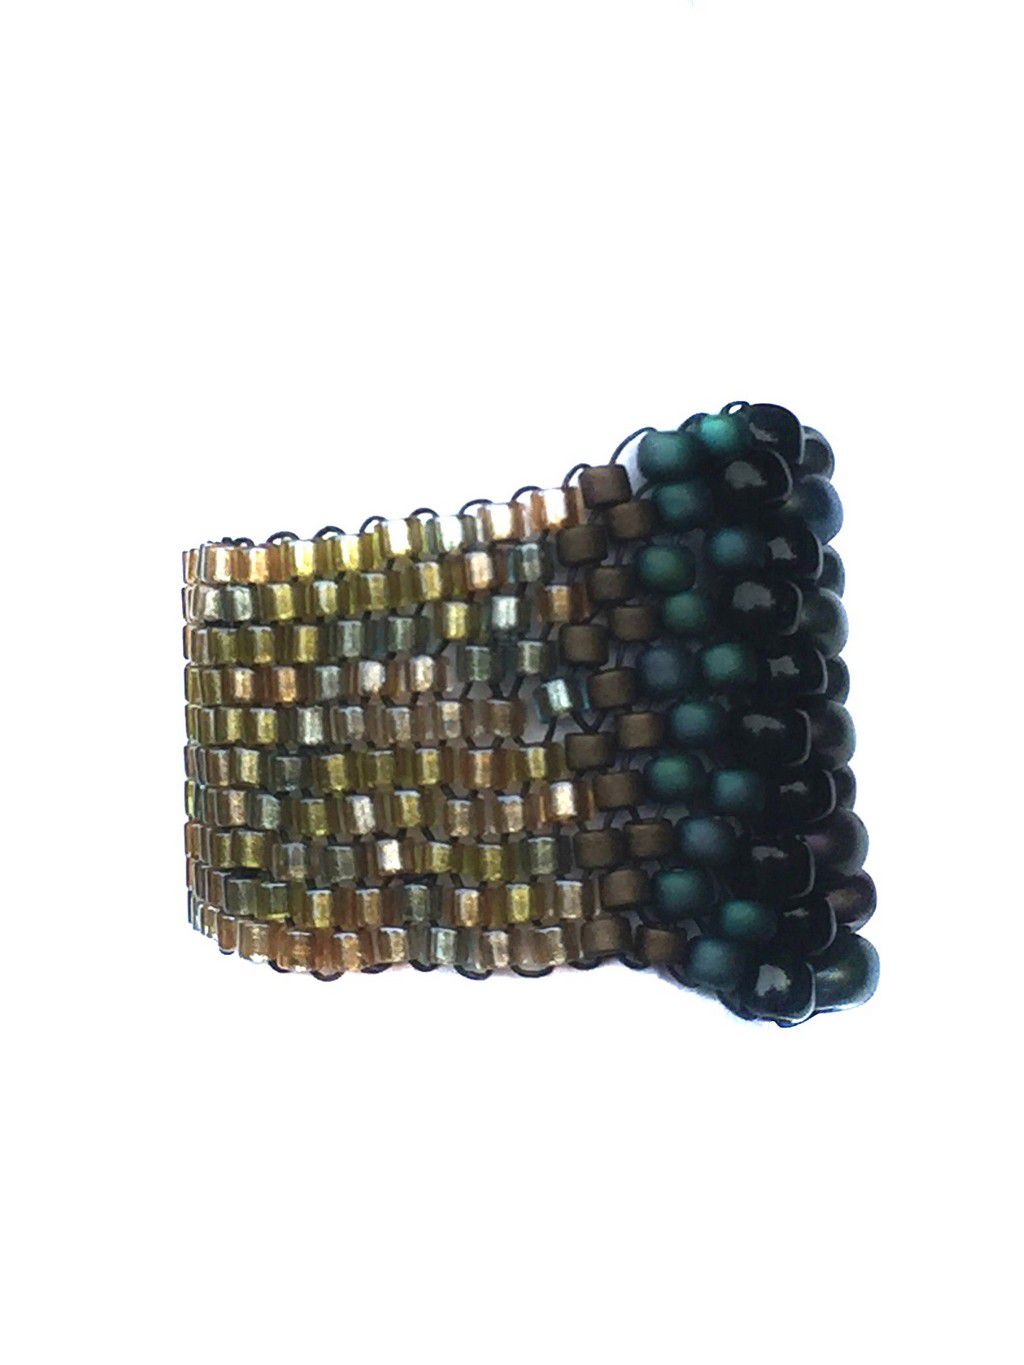 wide band ring fully beaded in green, black, bronze, and gold, super comfortable